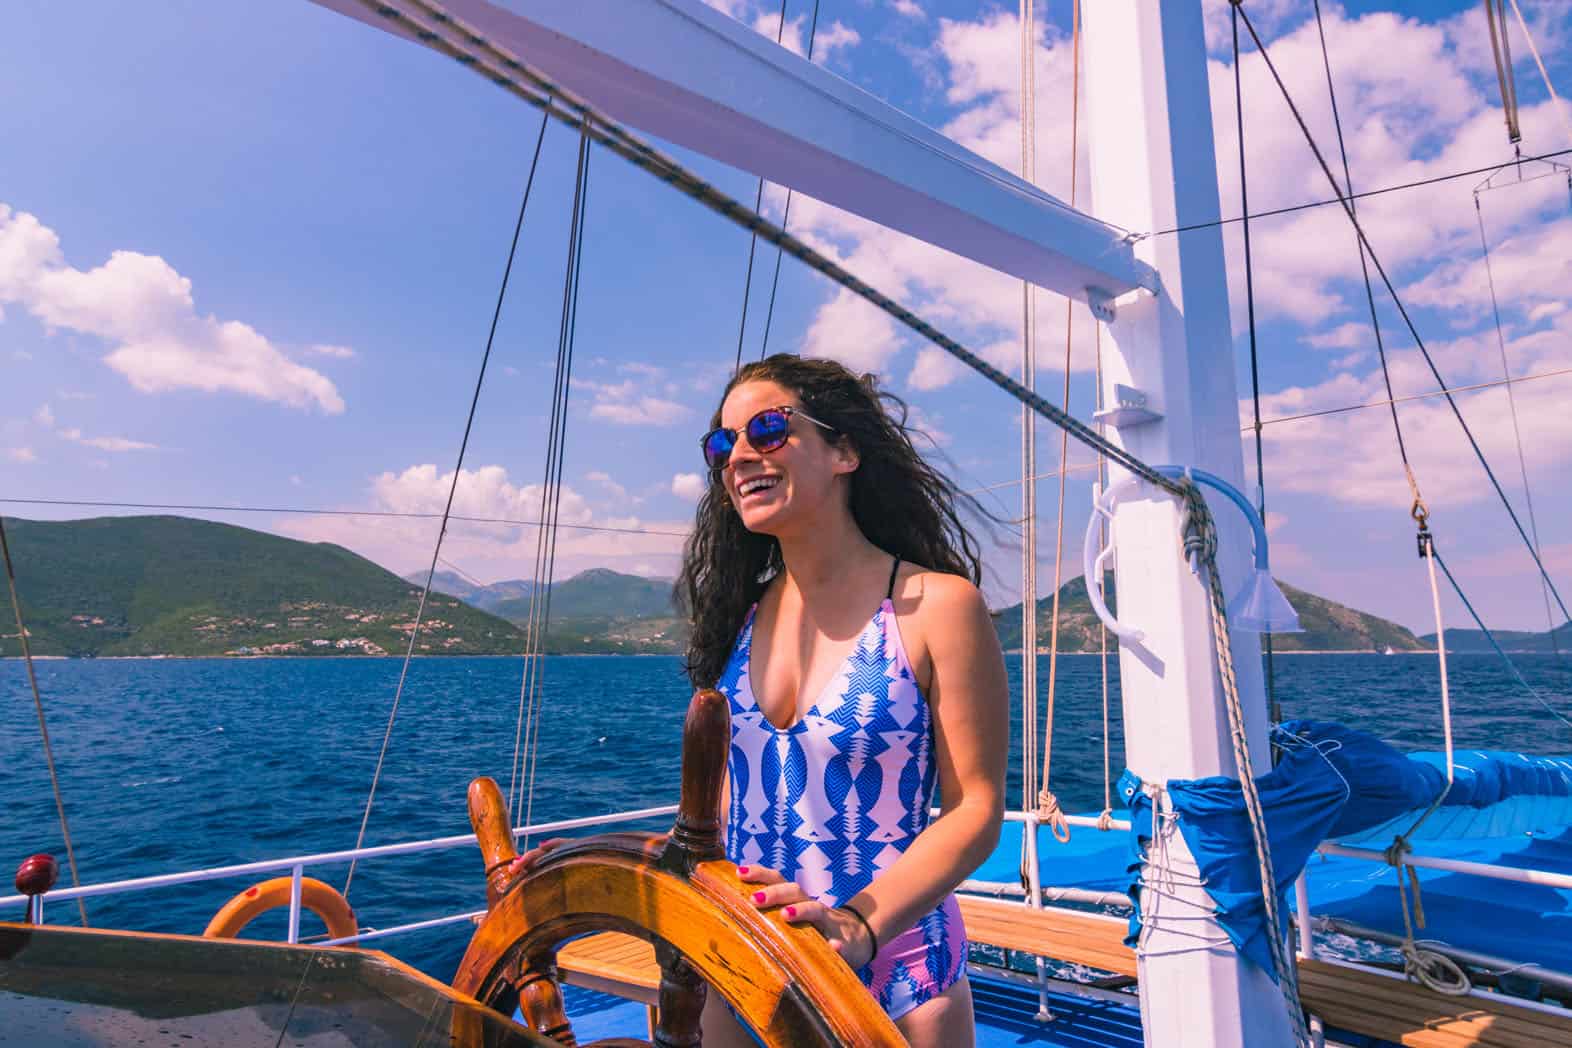 Nina standing at the helm of a sail boat and smiling.